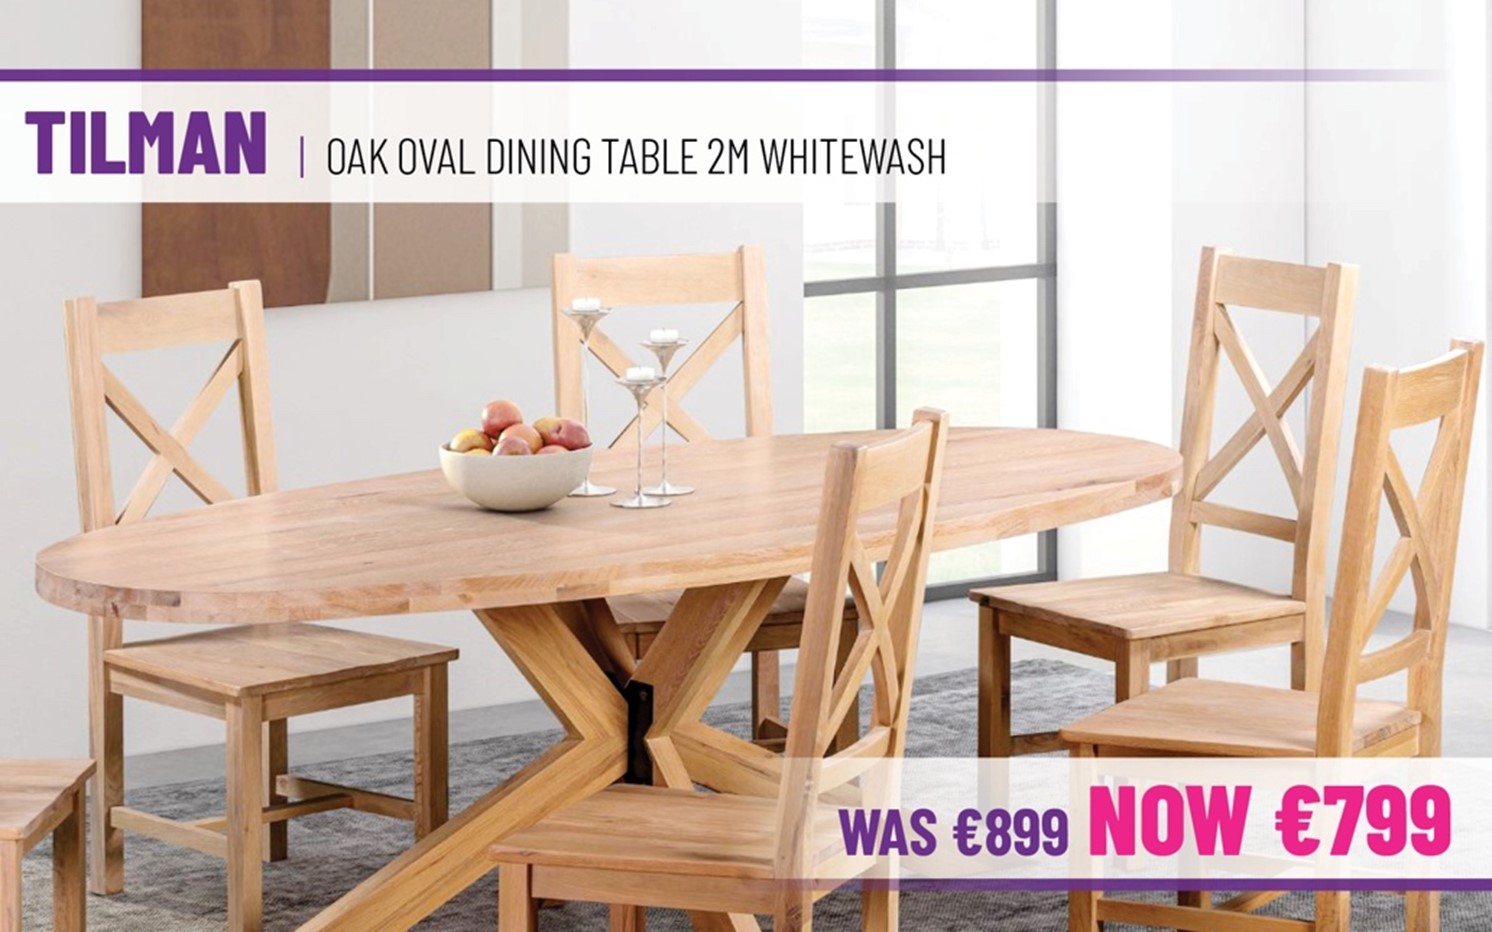 Tilman-oak-dining-set-table-and-chairs.